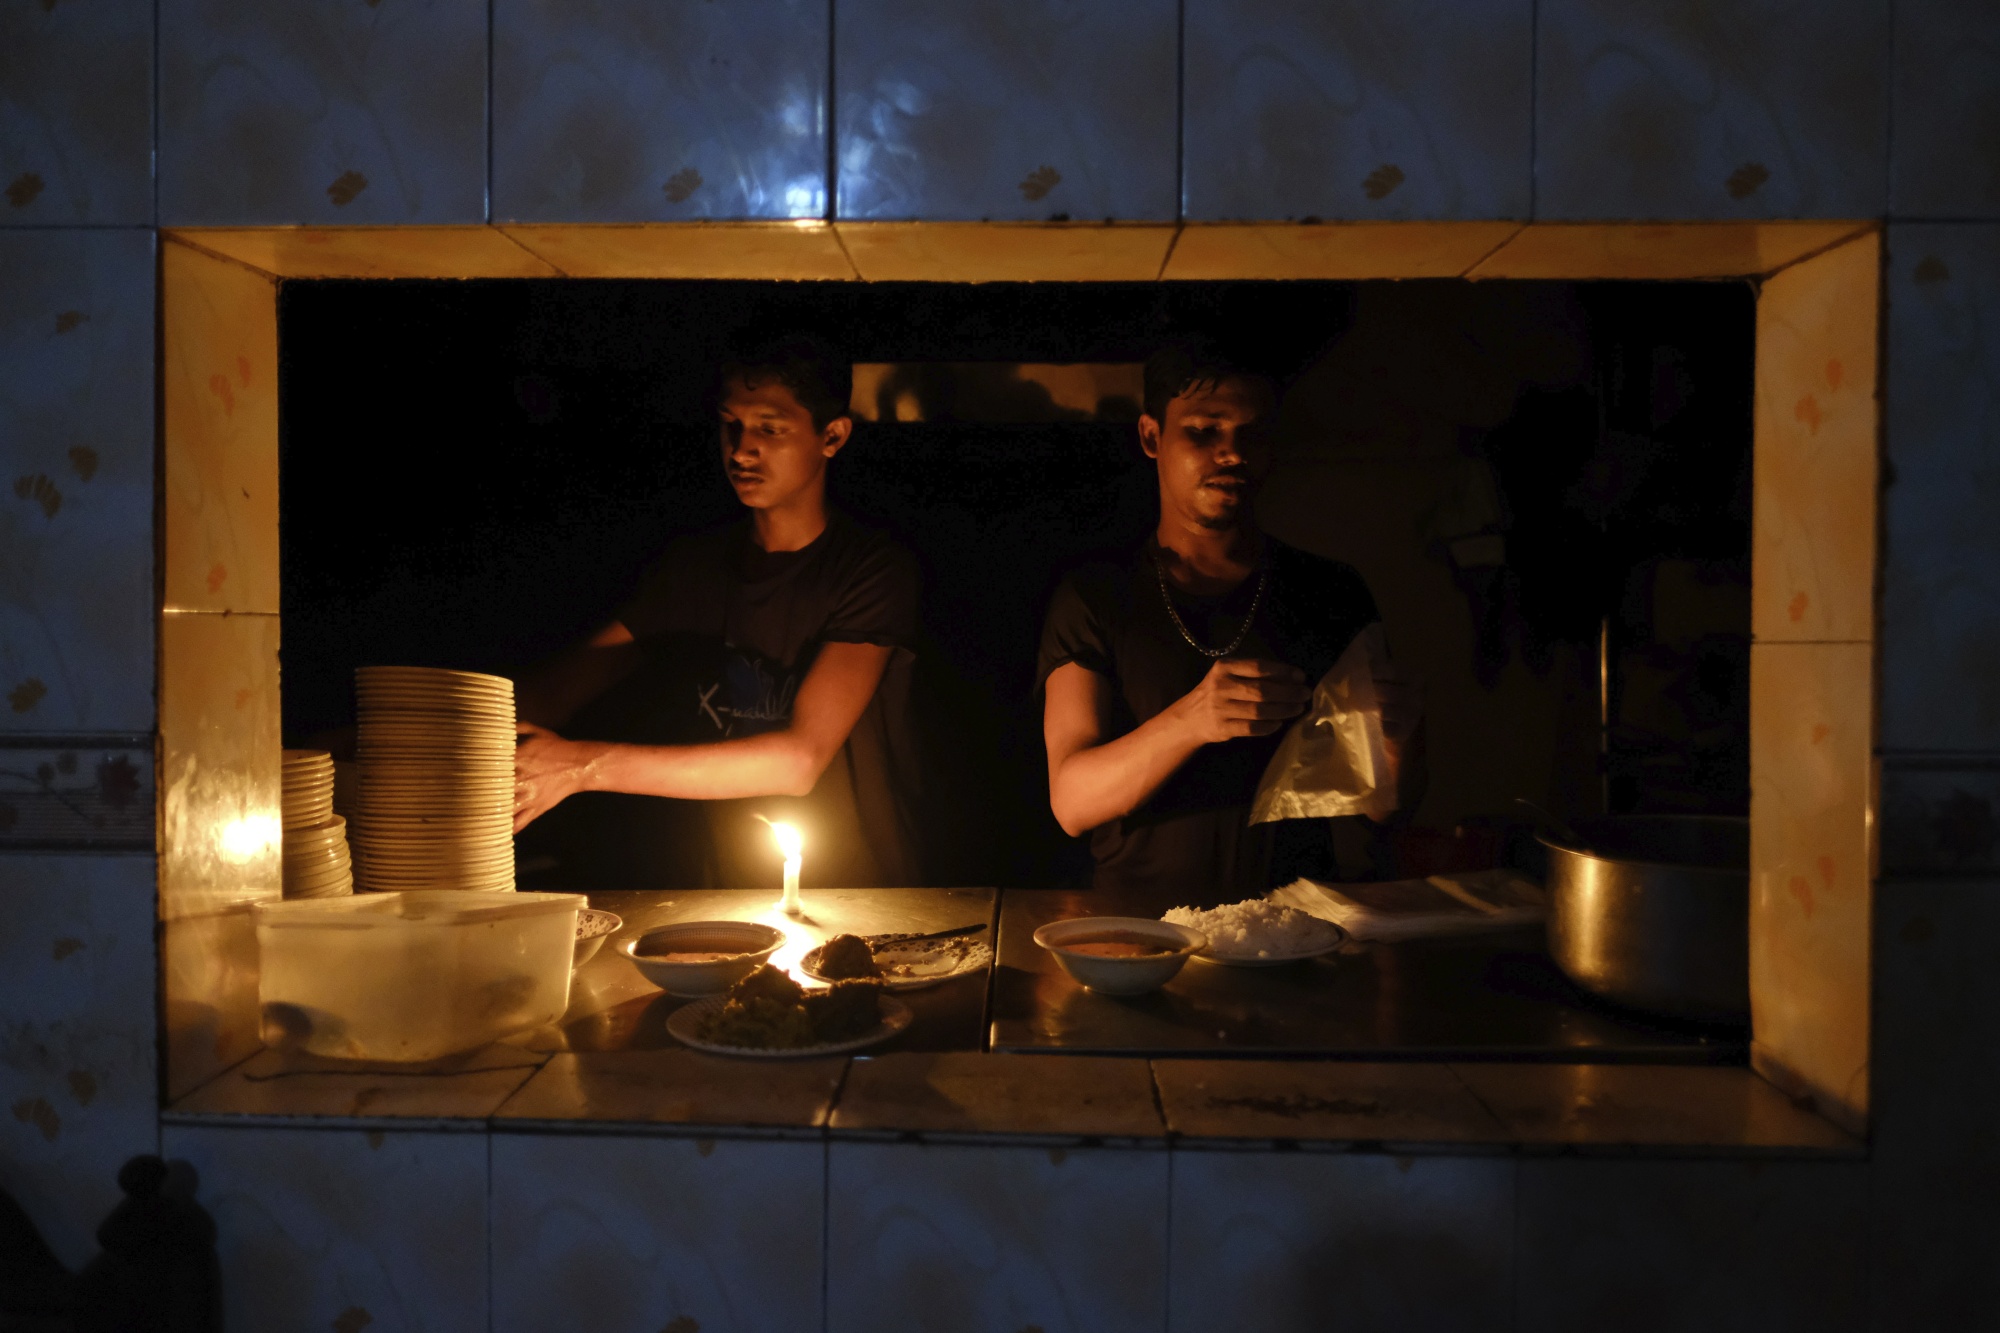 Power Restored in Bangladesh After 96 Million Suffer Blackouts - Bloomberg